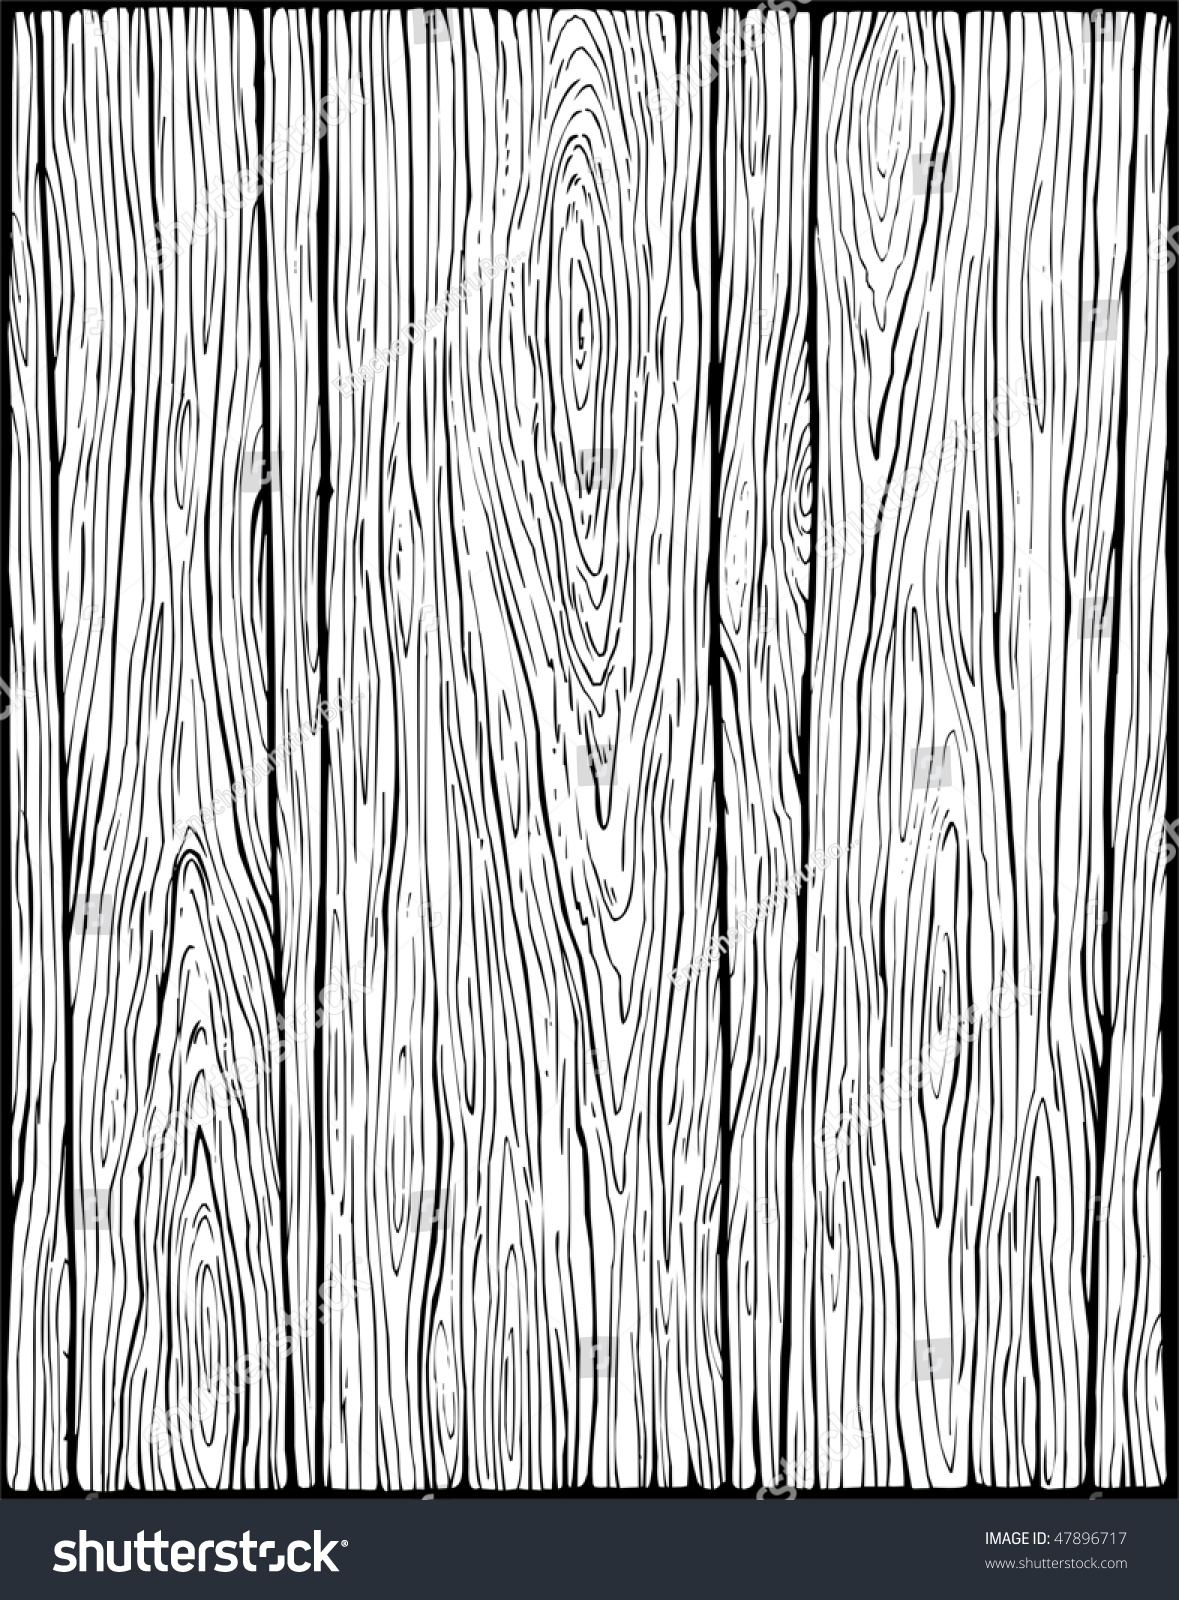 Wood Texture - Old Style - Black & White Stock Vector Illustration ...